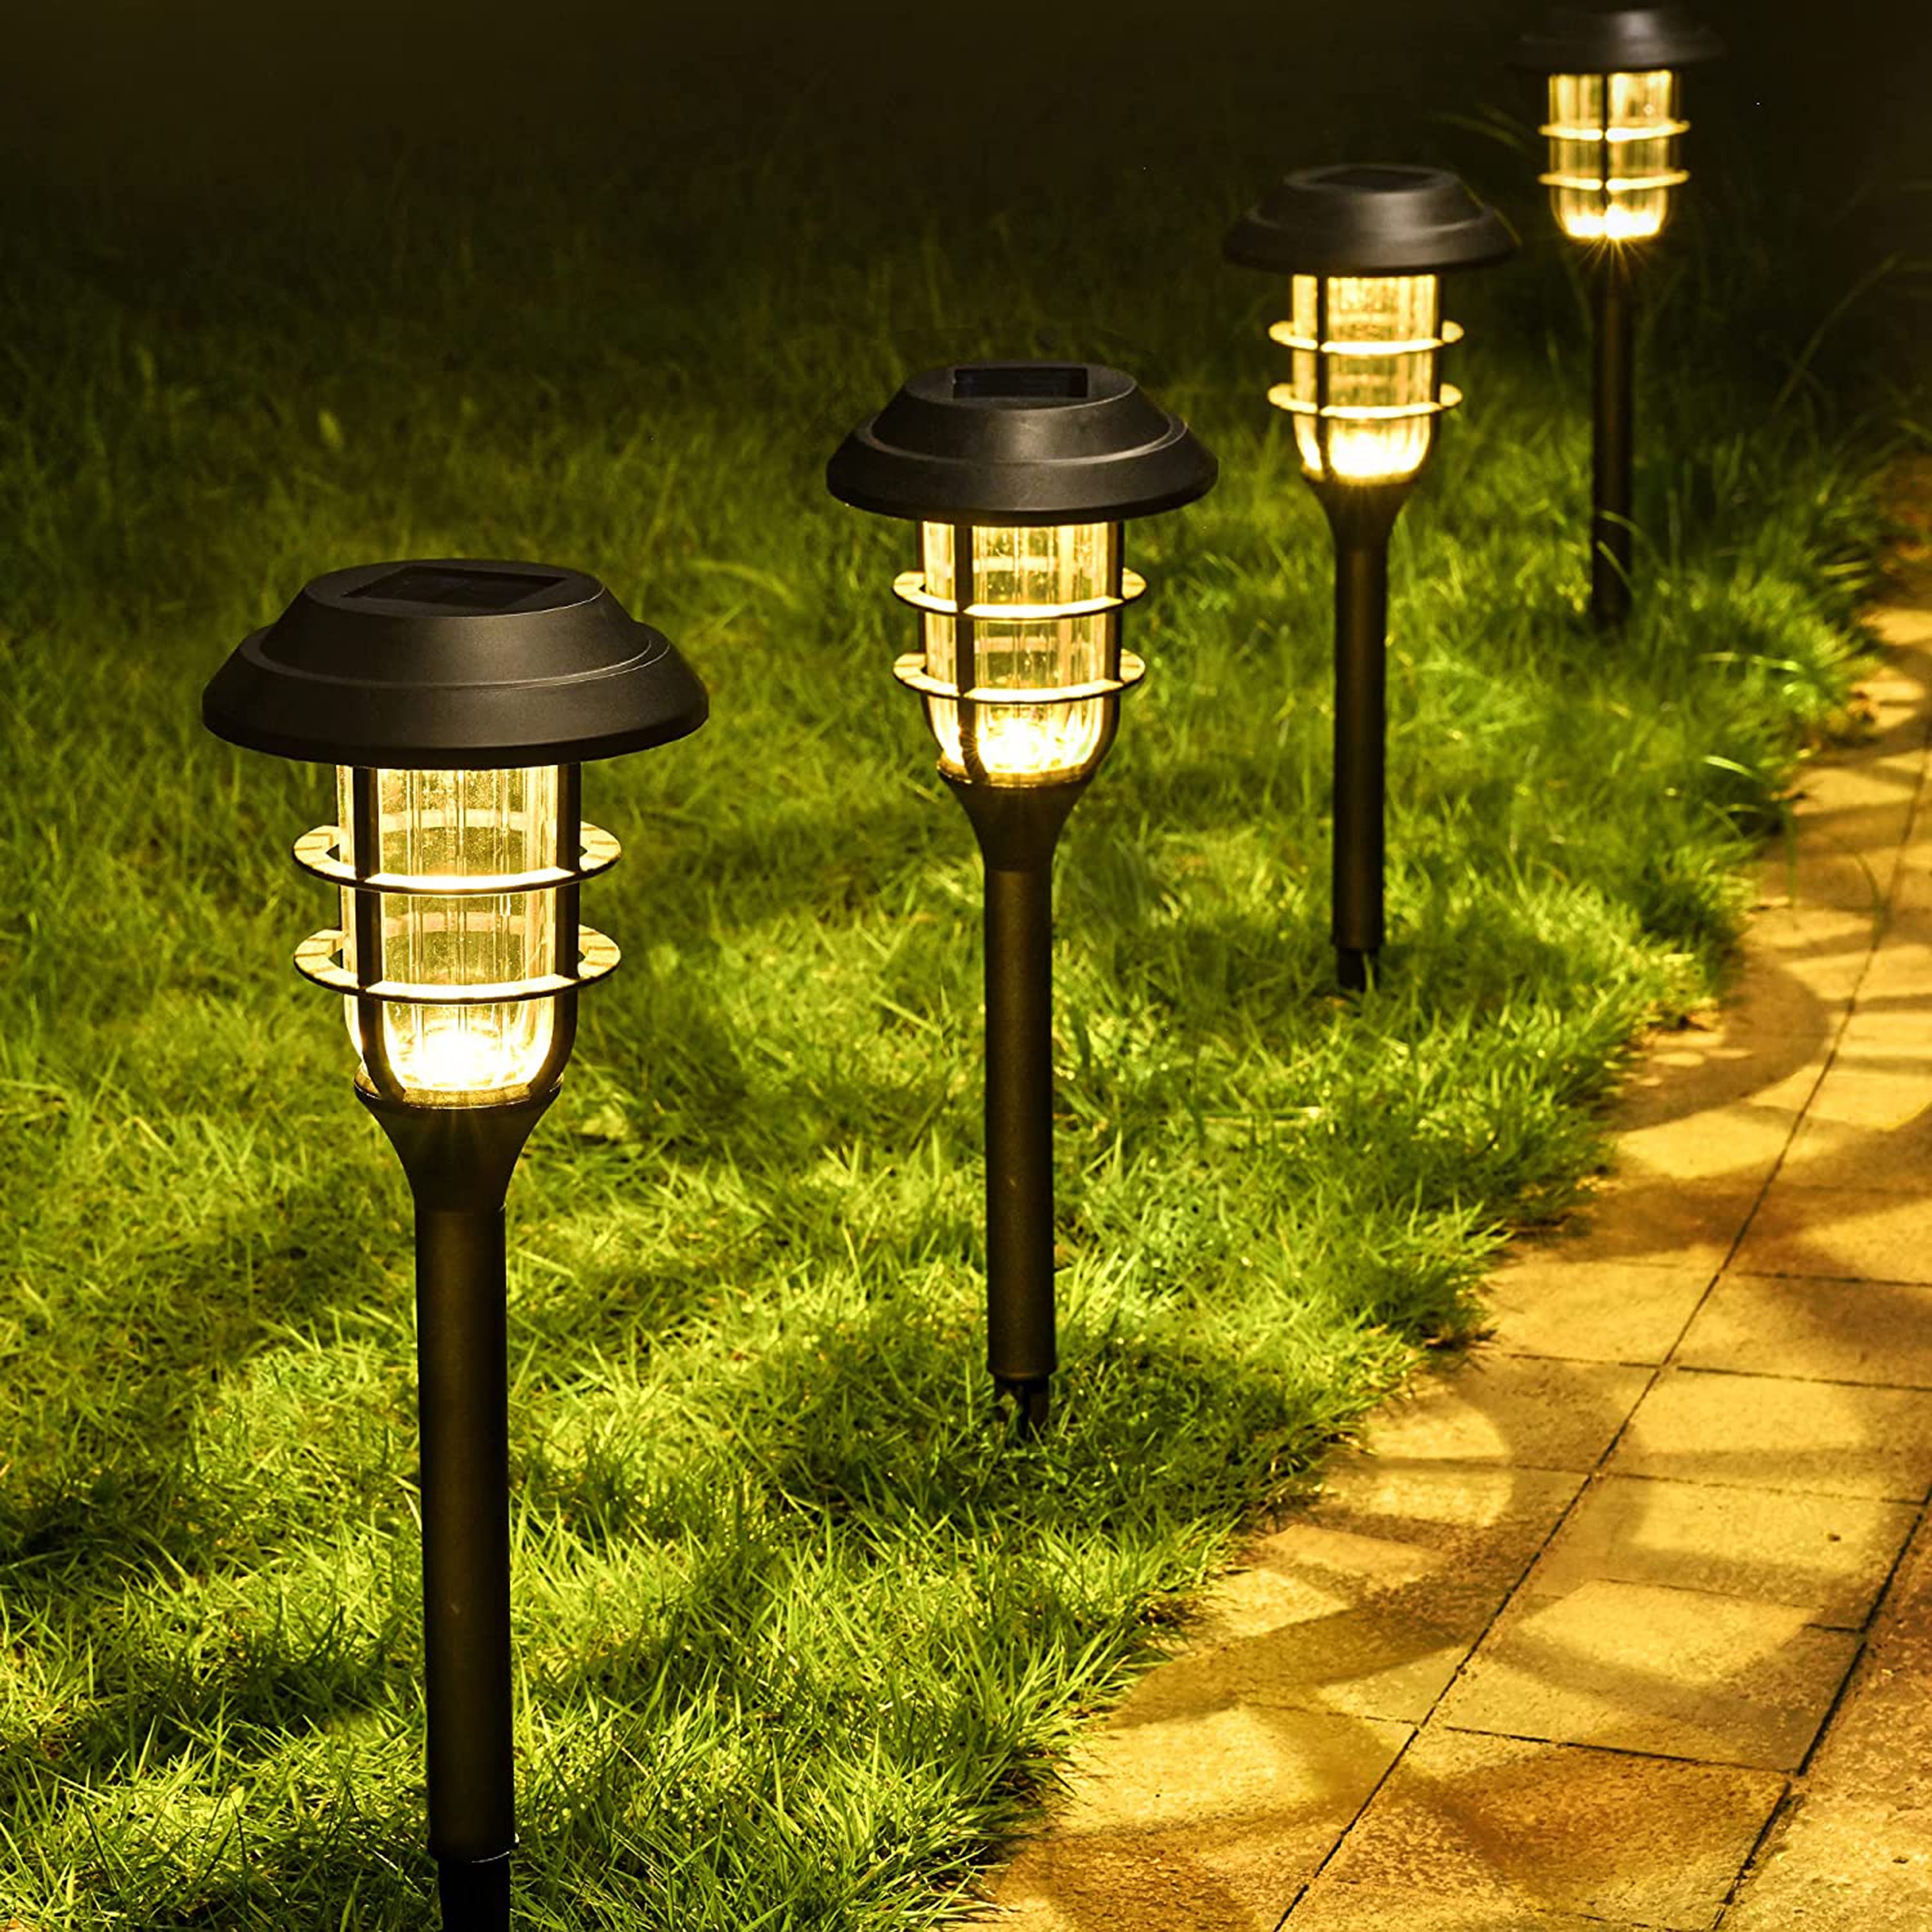 High Lumen Automatic Led for Yard Patio Walkway Landscape In-Ground Spike Pathway Stainless Steel, White WOHOME 8-Pack Solar Powered Path Lights 